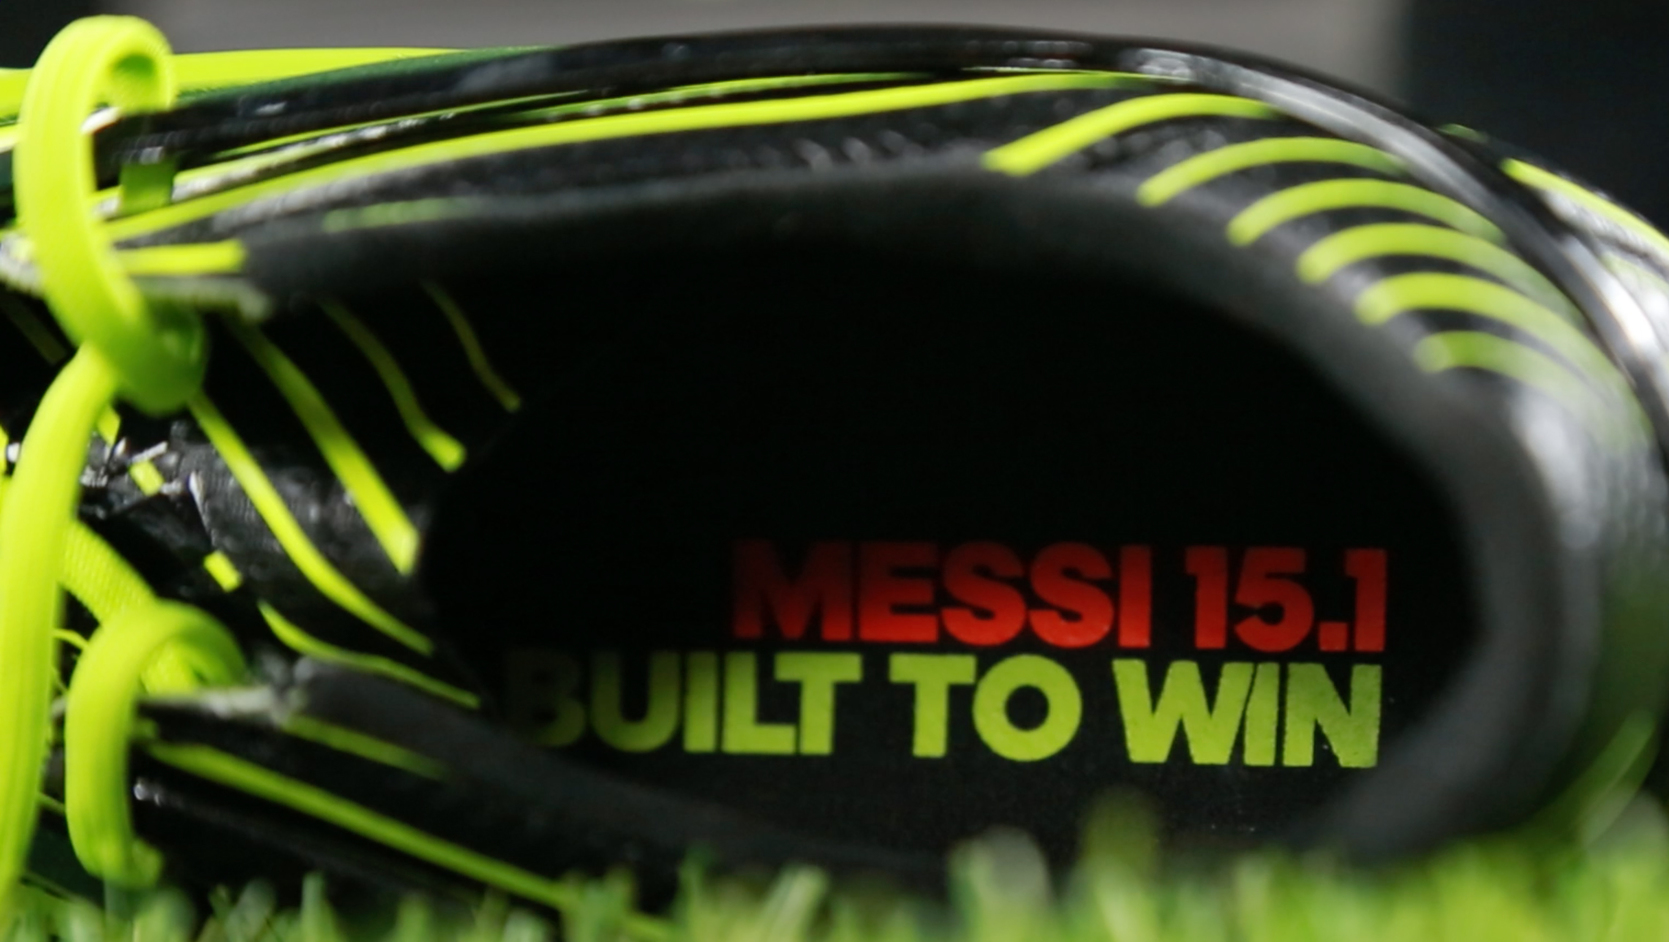 adidas messi 15.1 cleats